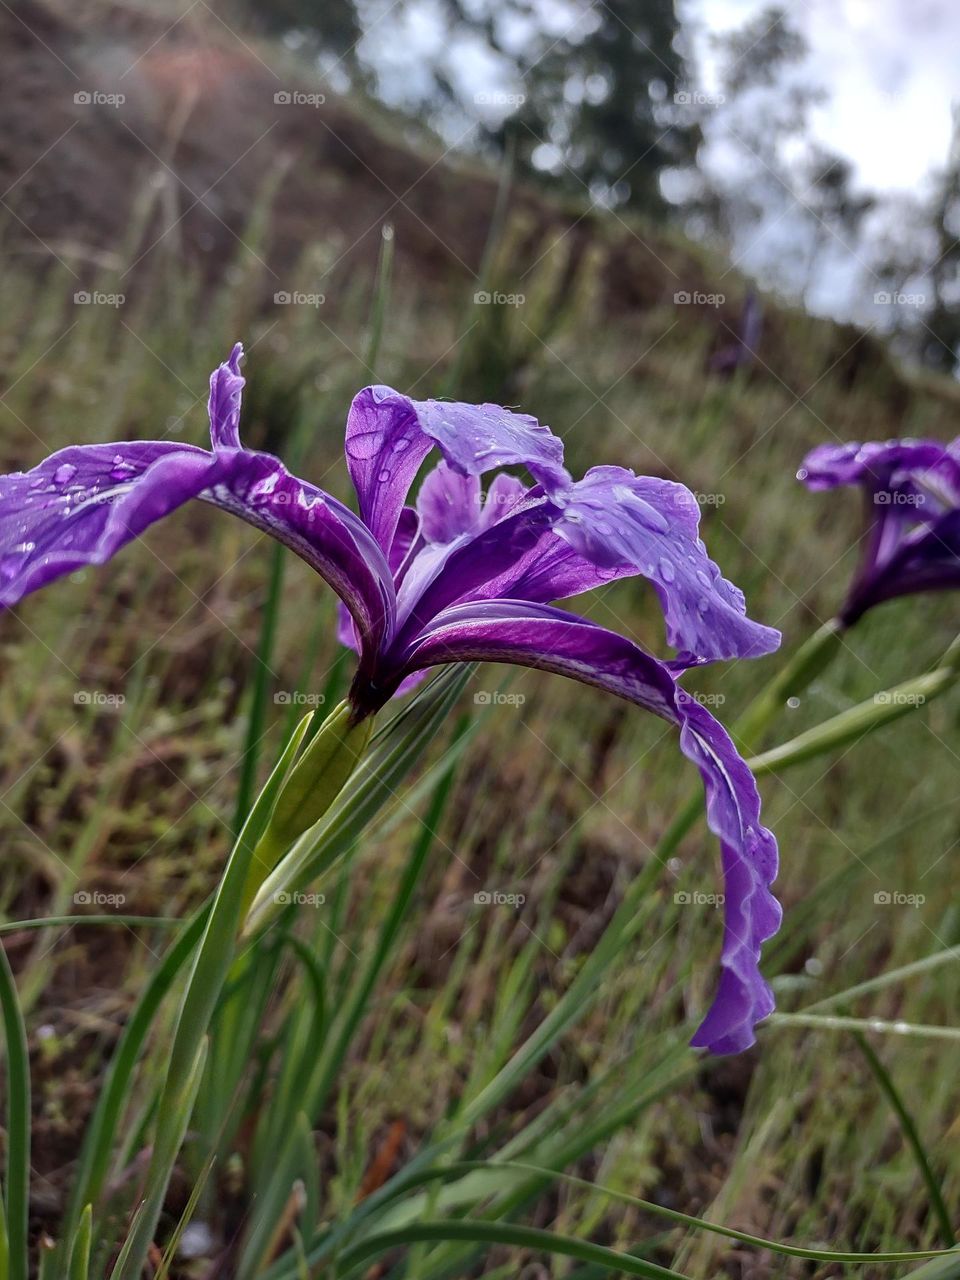 this is a wild iris from oregon